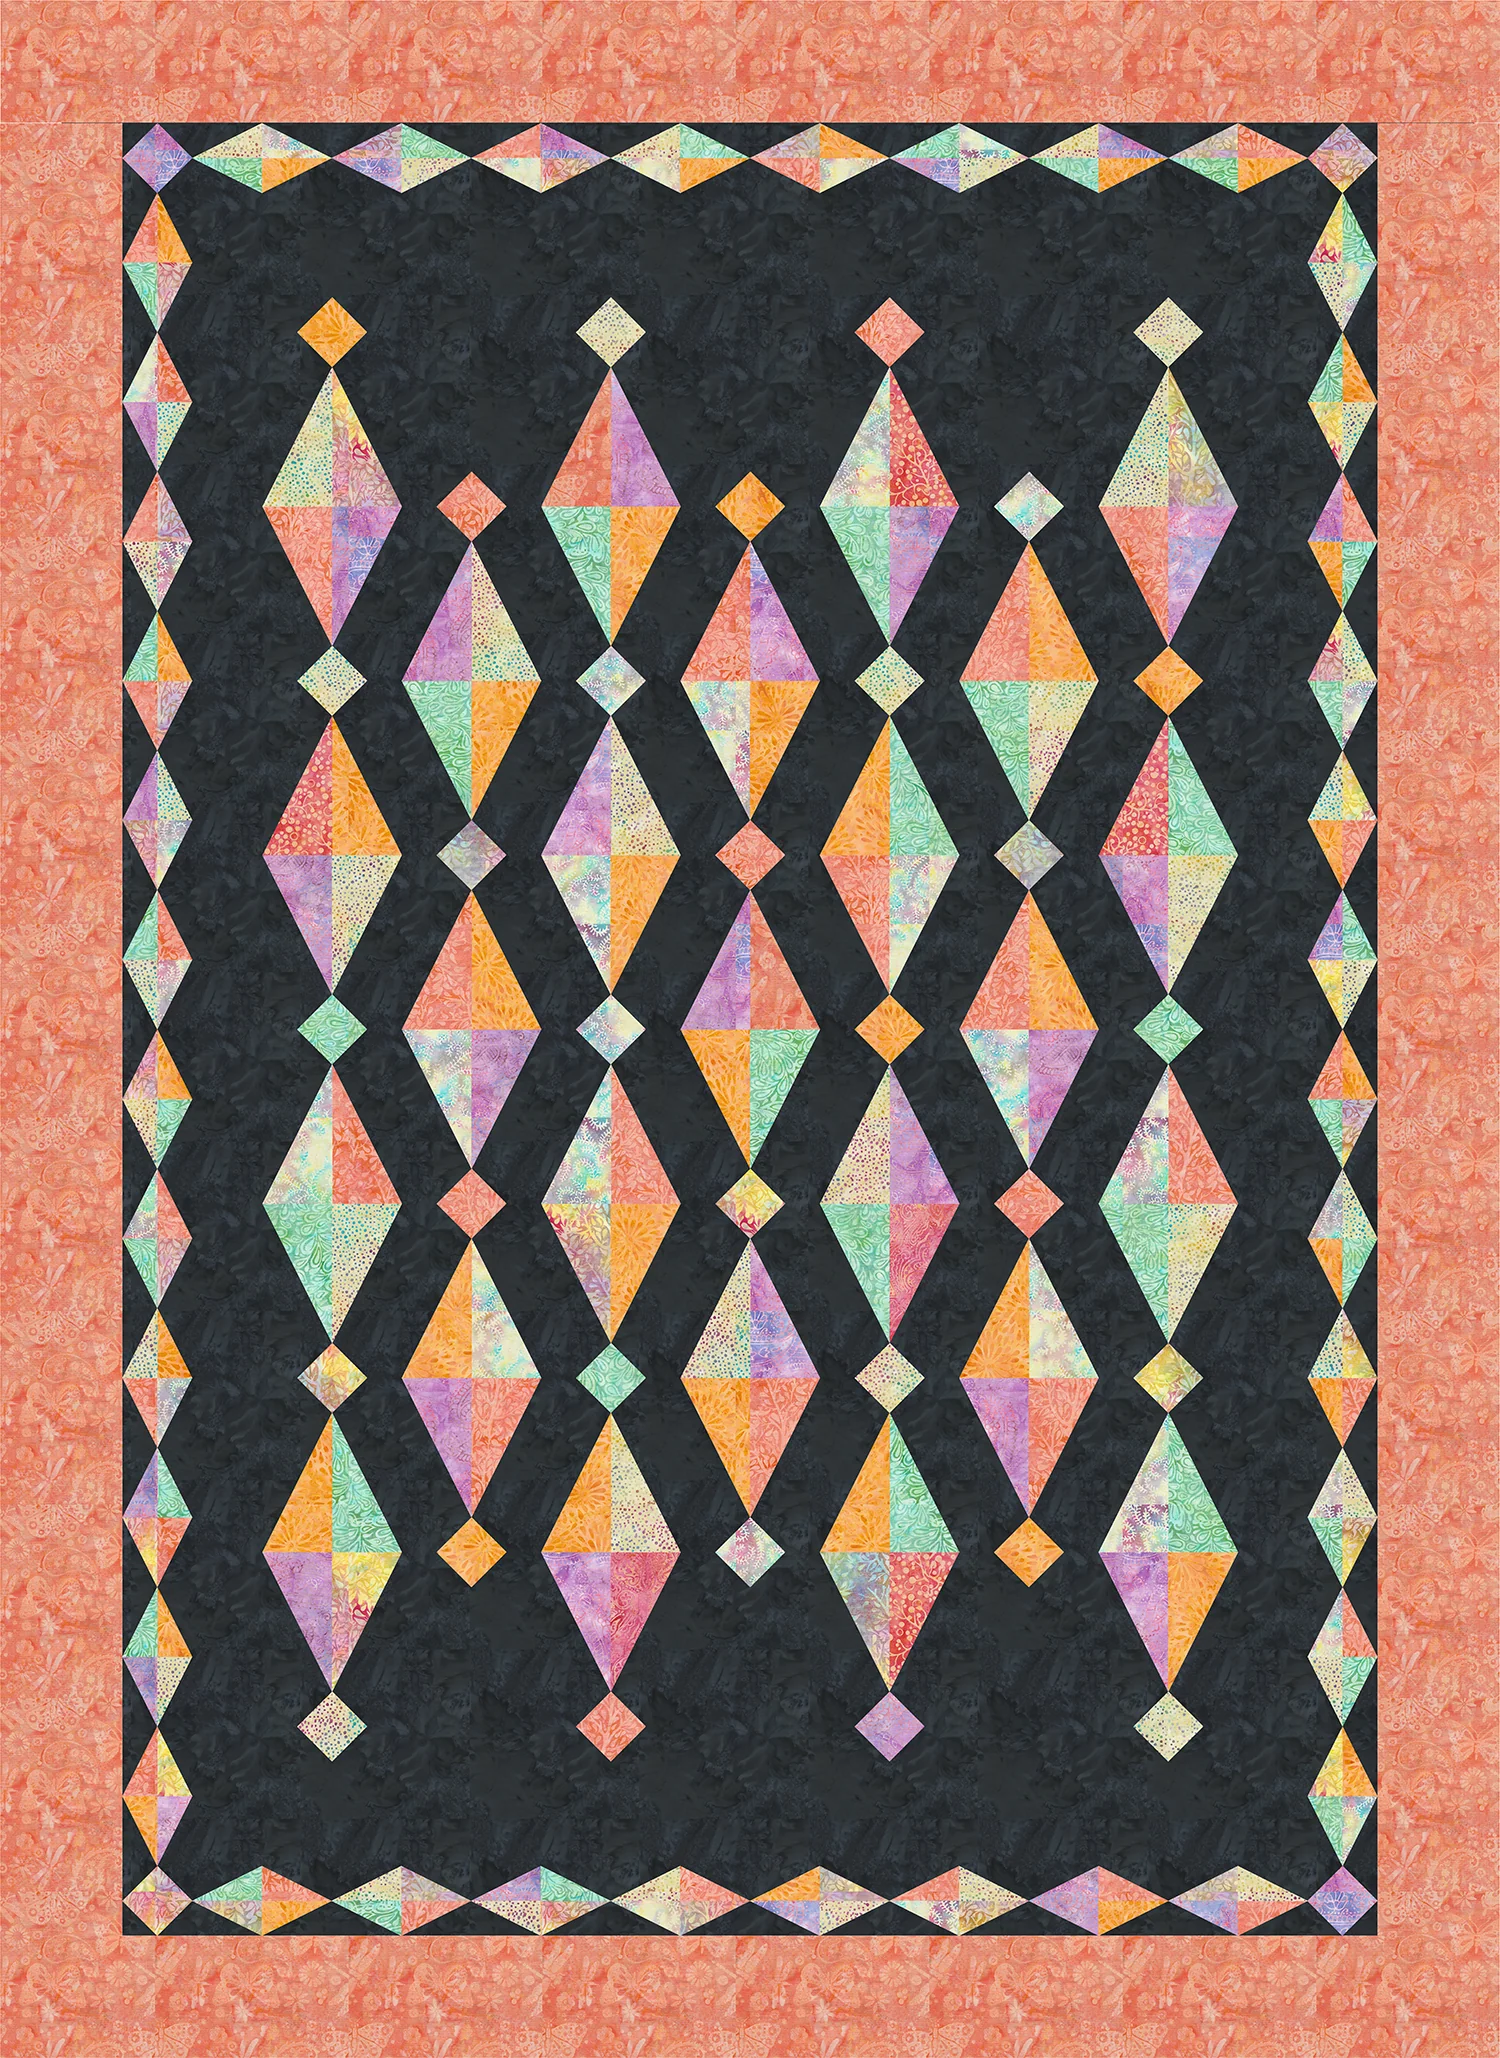 Studio 180 Design Diamonds and Pearls Quilting Pattern DTP072